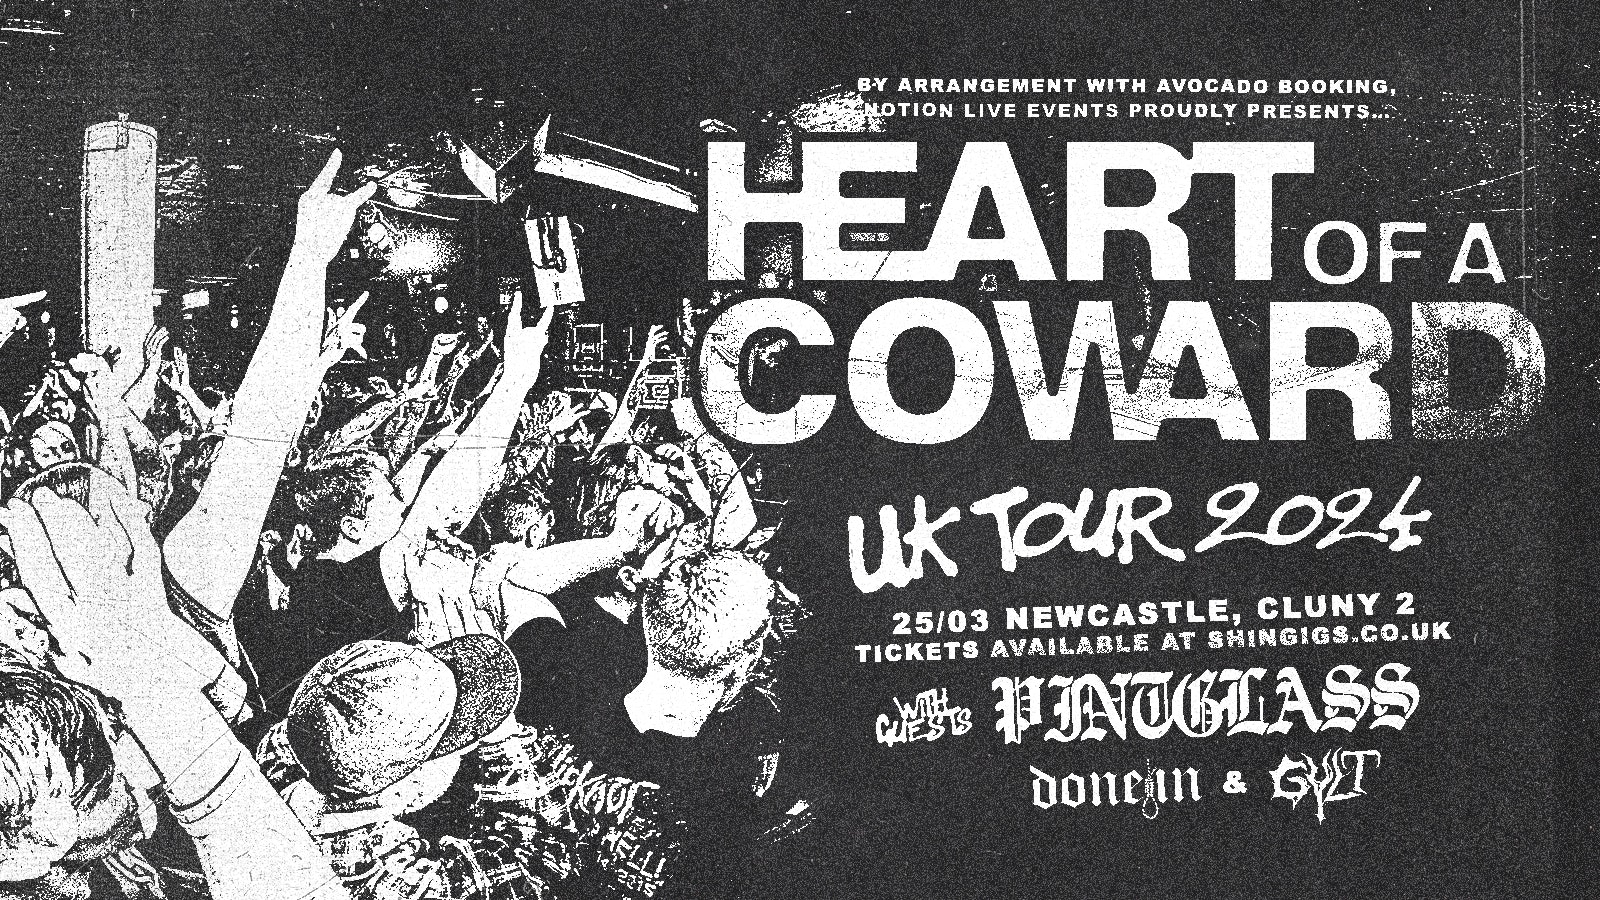 Heart of a Coward + Pintglass, Done In & Gylt